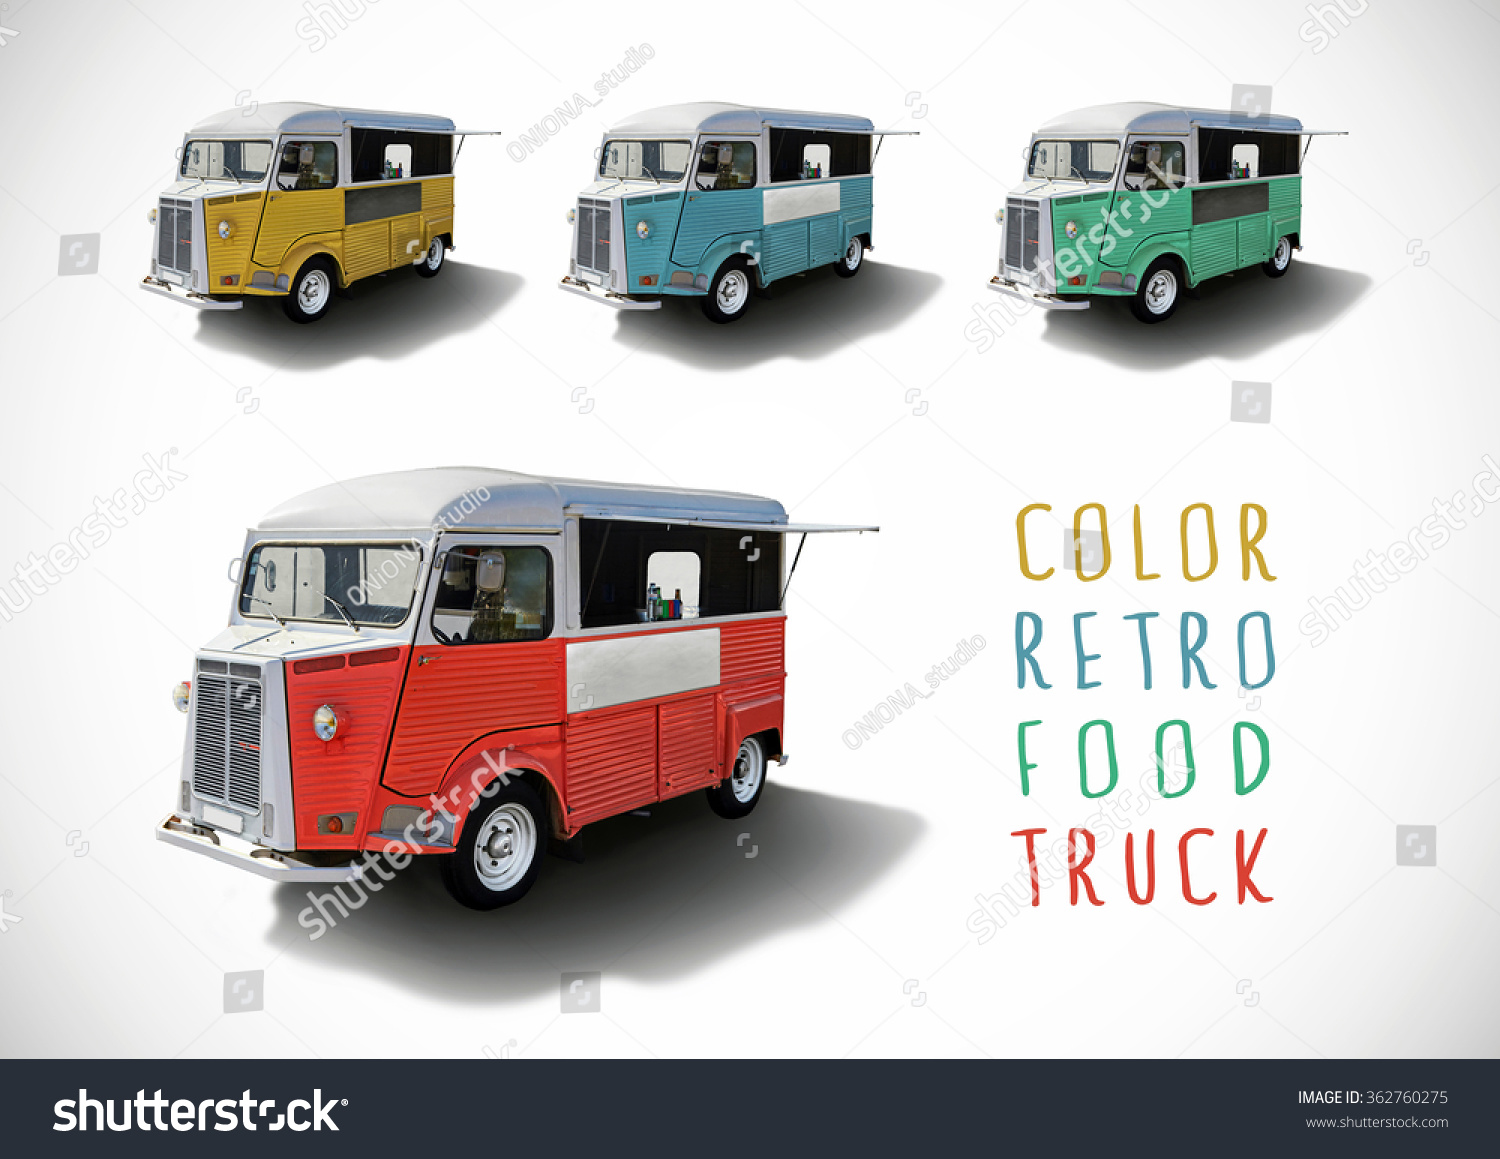 Set of color retro food trucks isolated with cutting path #362760275